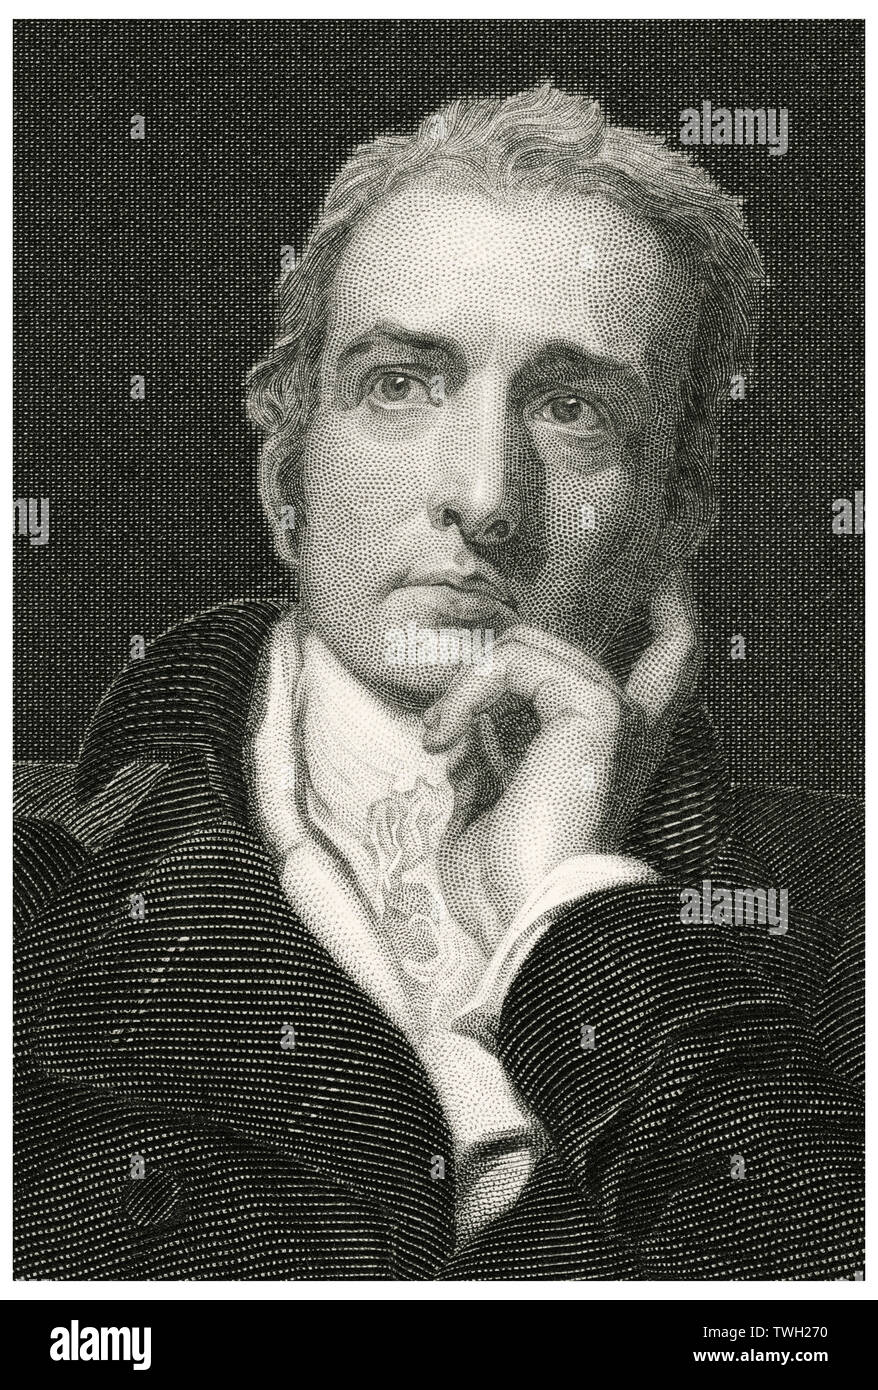 John Philip Kemble (1757-1823), English Actor, Head and Shoulders Portrait, Steel Engraving, Portrait Gallery of Eminent Men and Women of Europe and America by Evert A. Duyckinck, Published by Henry J. Johnson, Johnson, Wilson & Company, New York, 1873 Stock Photo